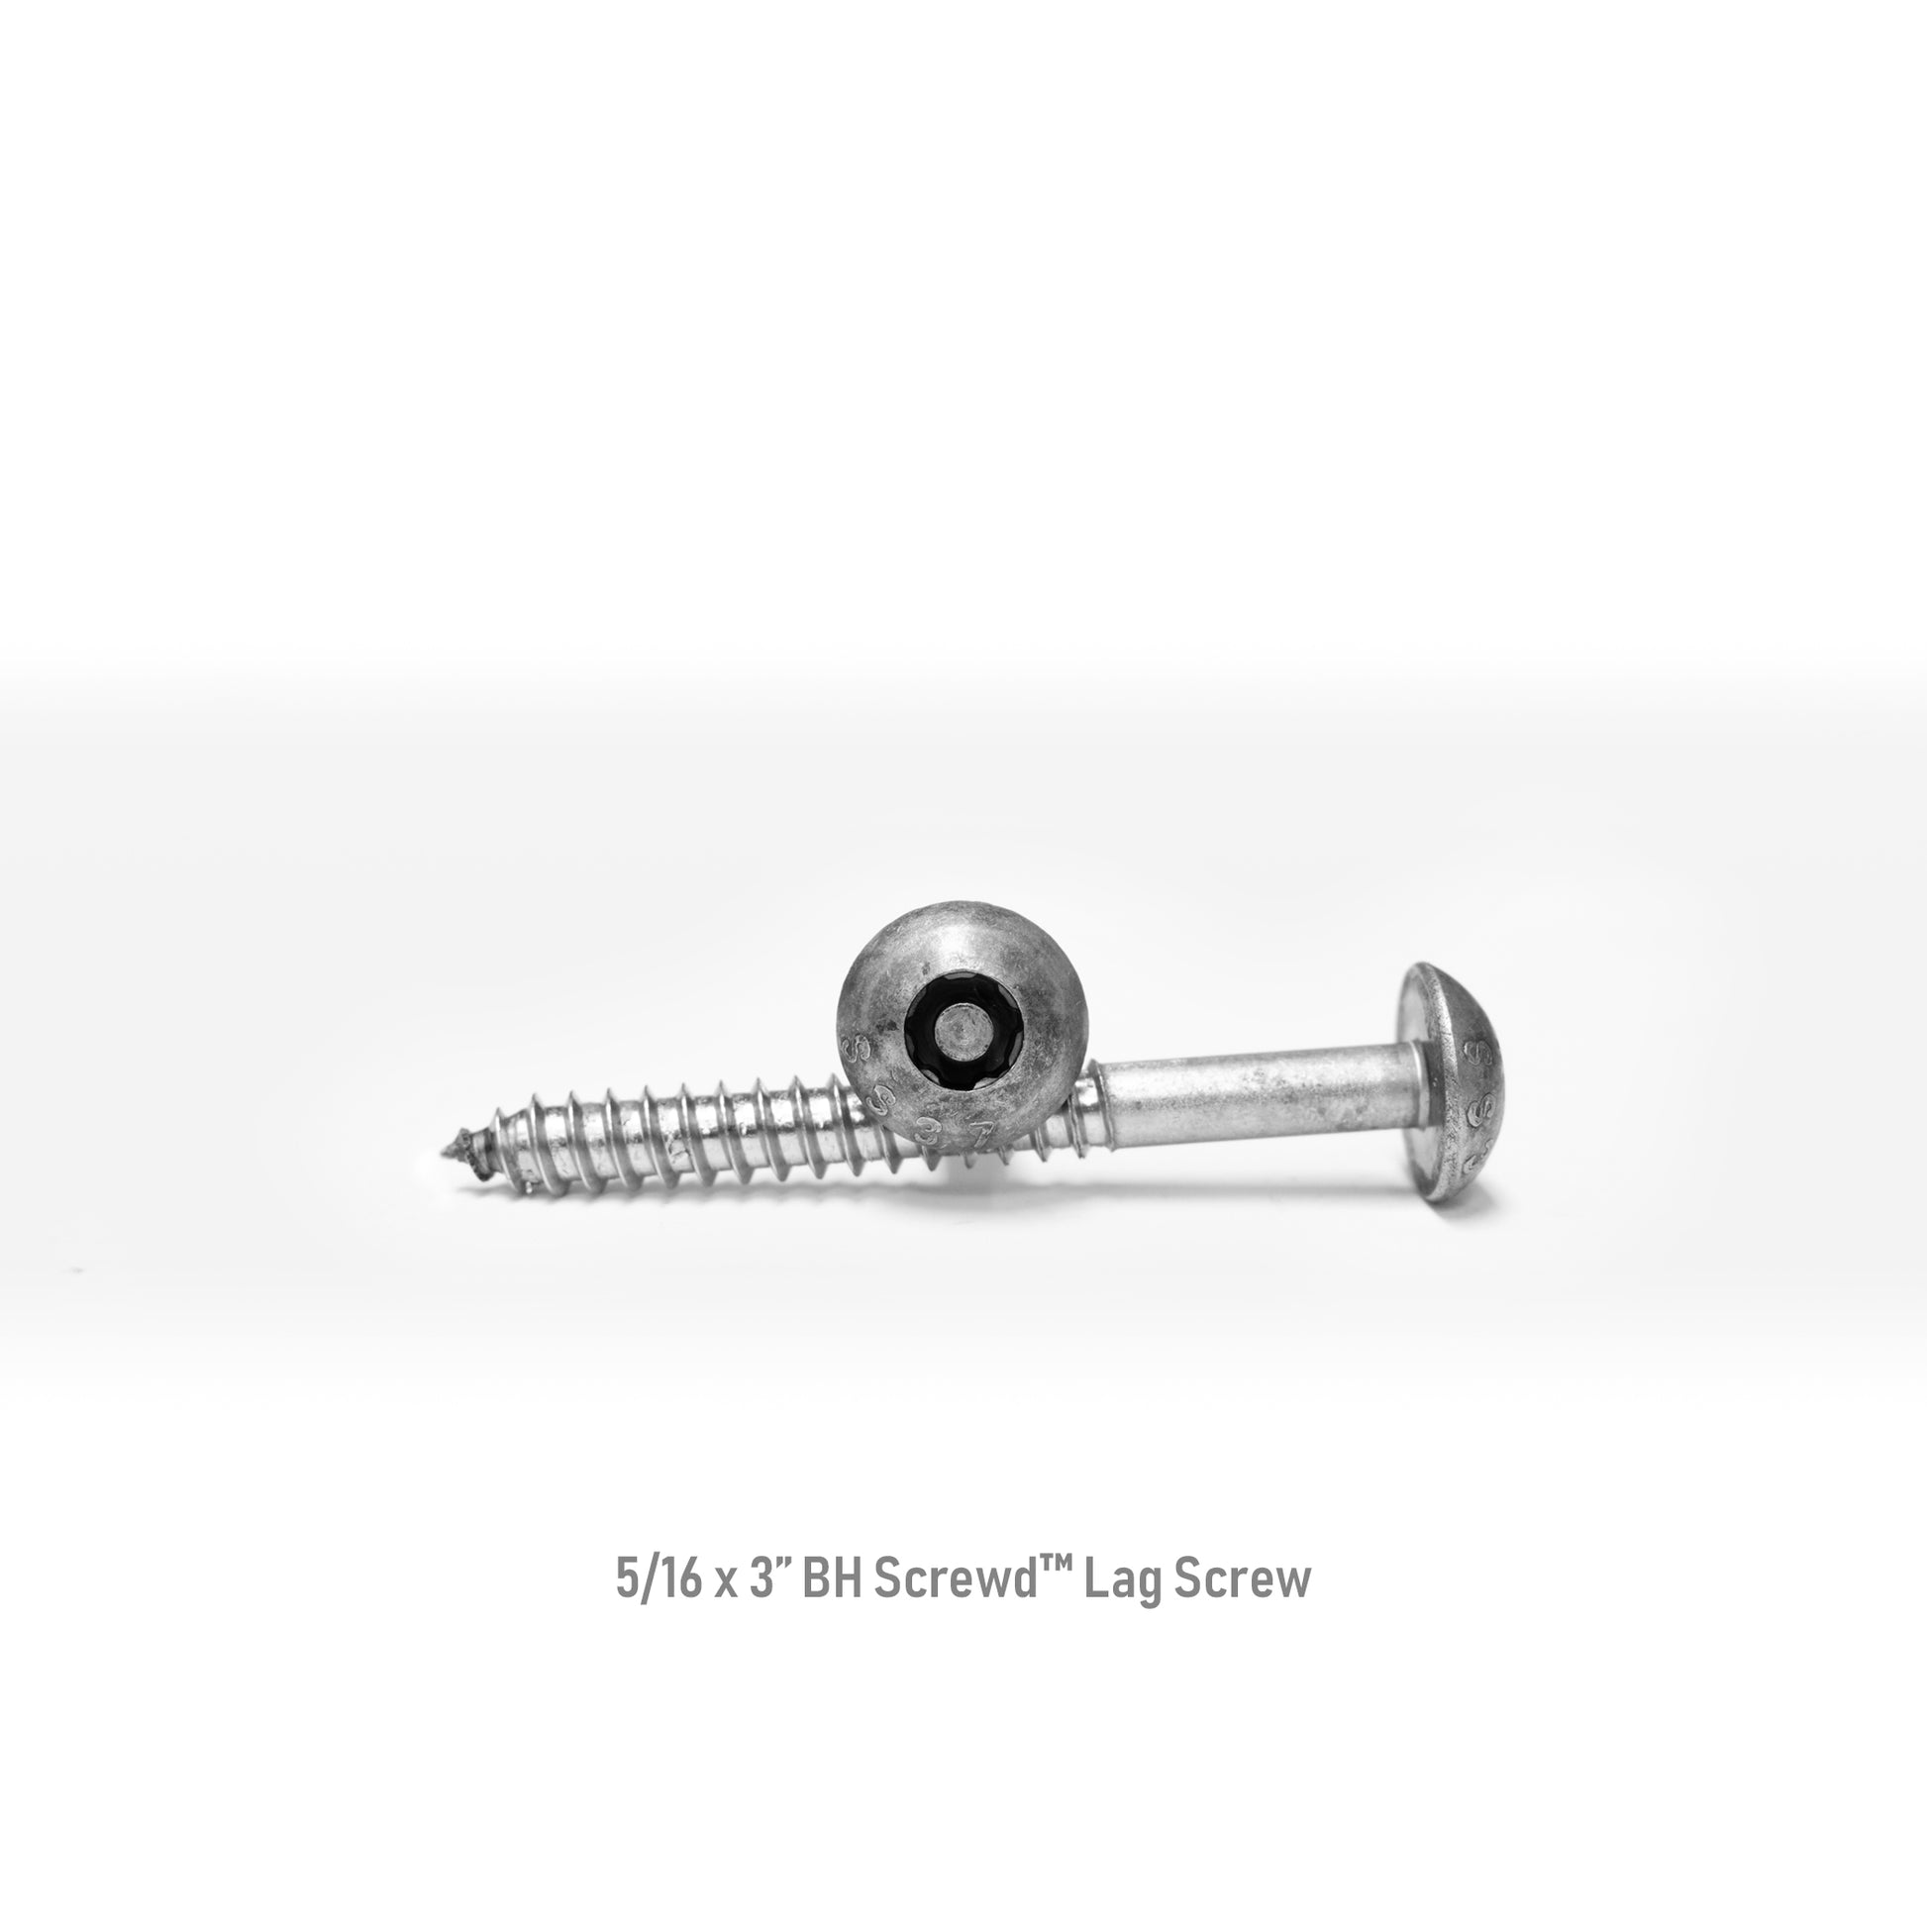 5/16-9 x 3" Button Head Screwd® Security Lag Screw Made out of Stainless Steel